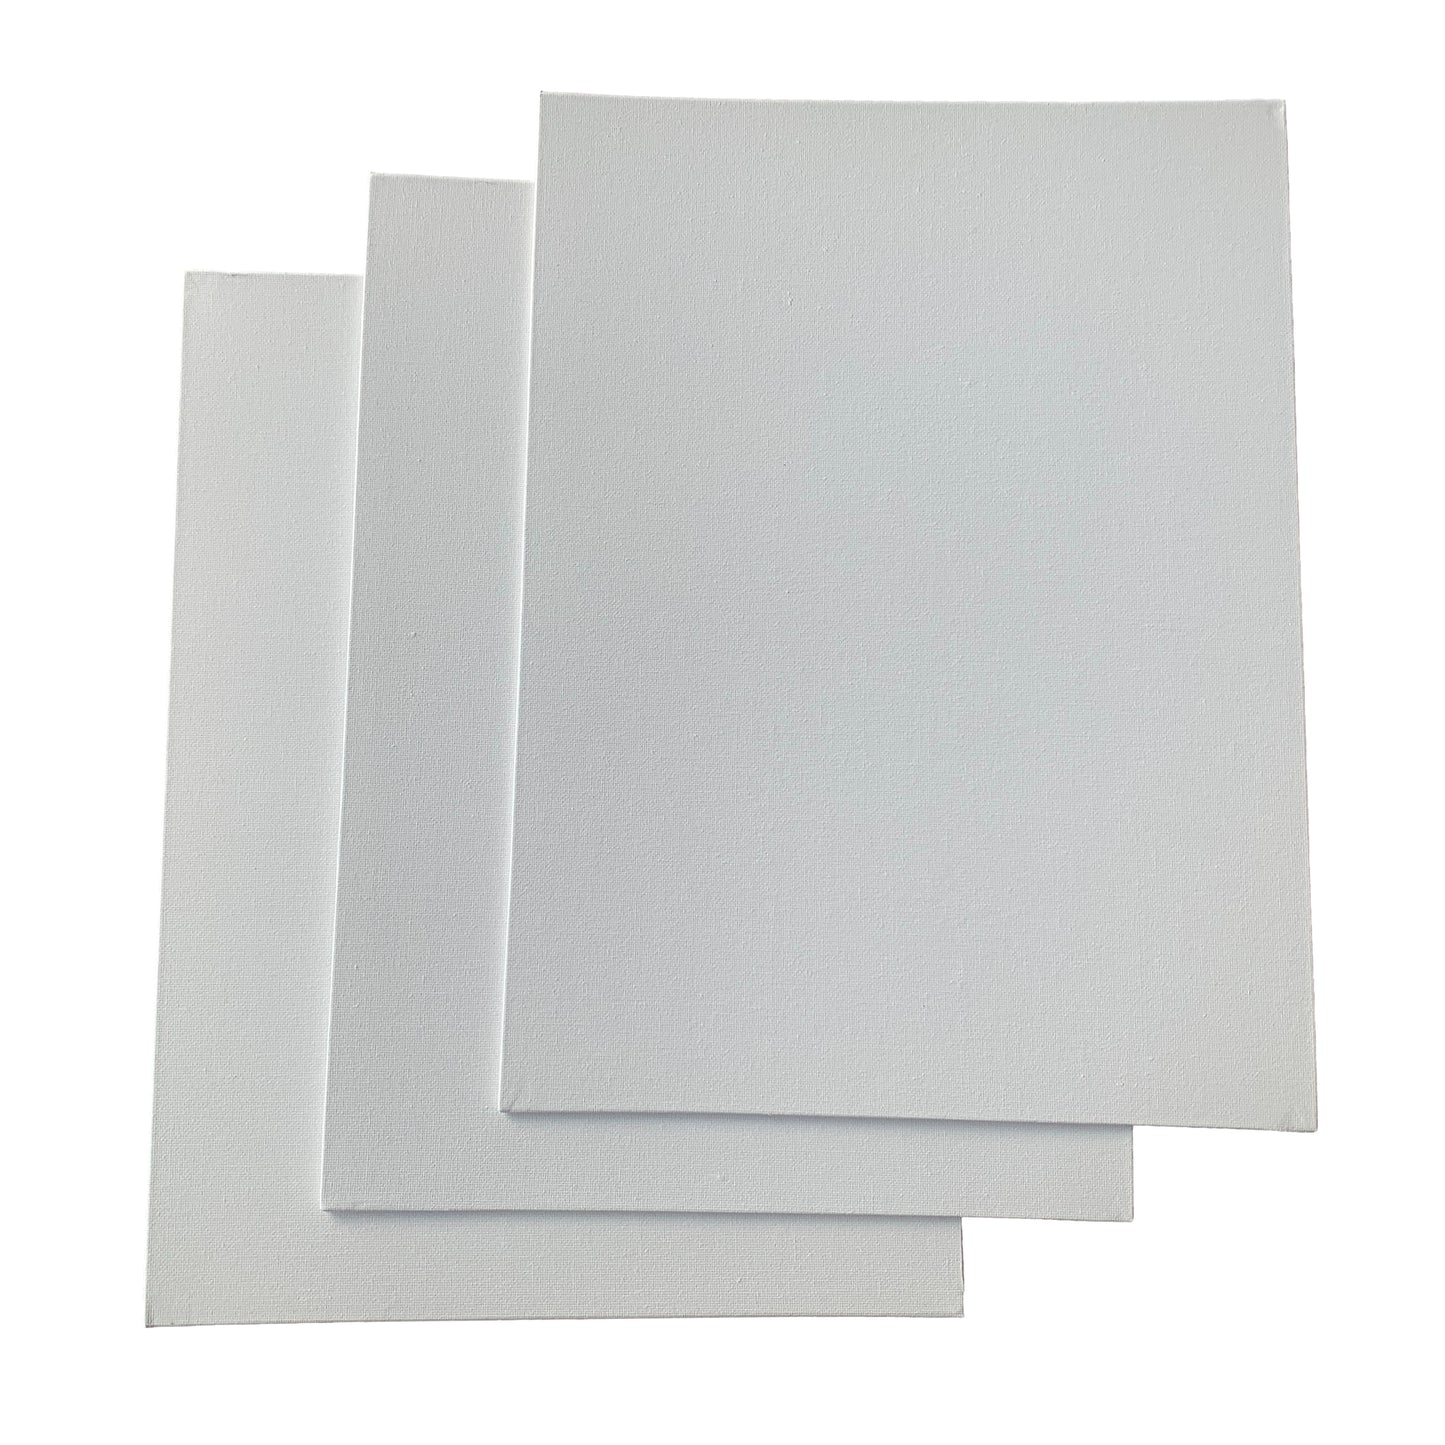 30x40cm Blank White Flat Stretched Board Art Canvas By Janrax